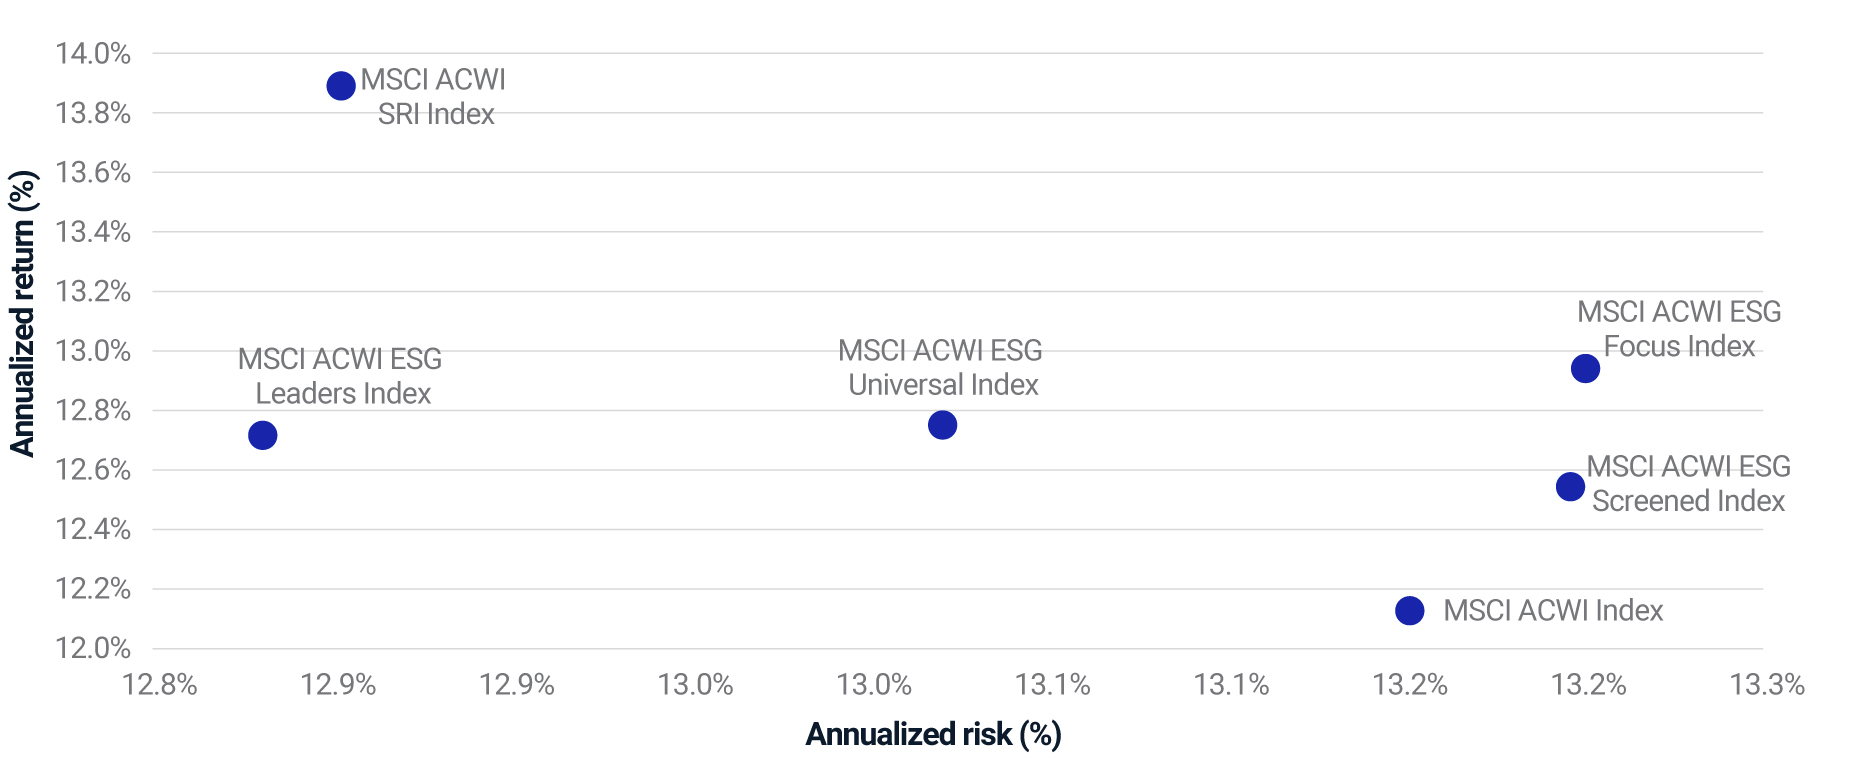 The relative risk and return profile of the MSCI ACWI ESG Indexes.